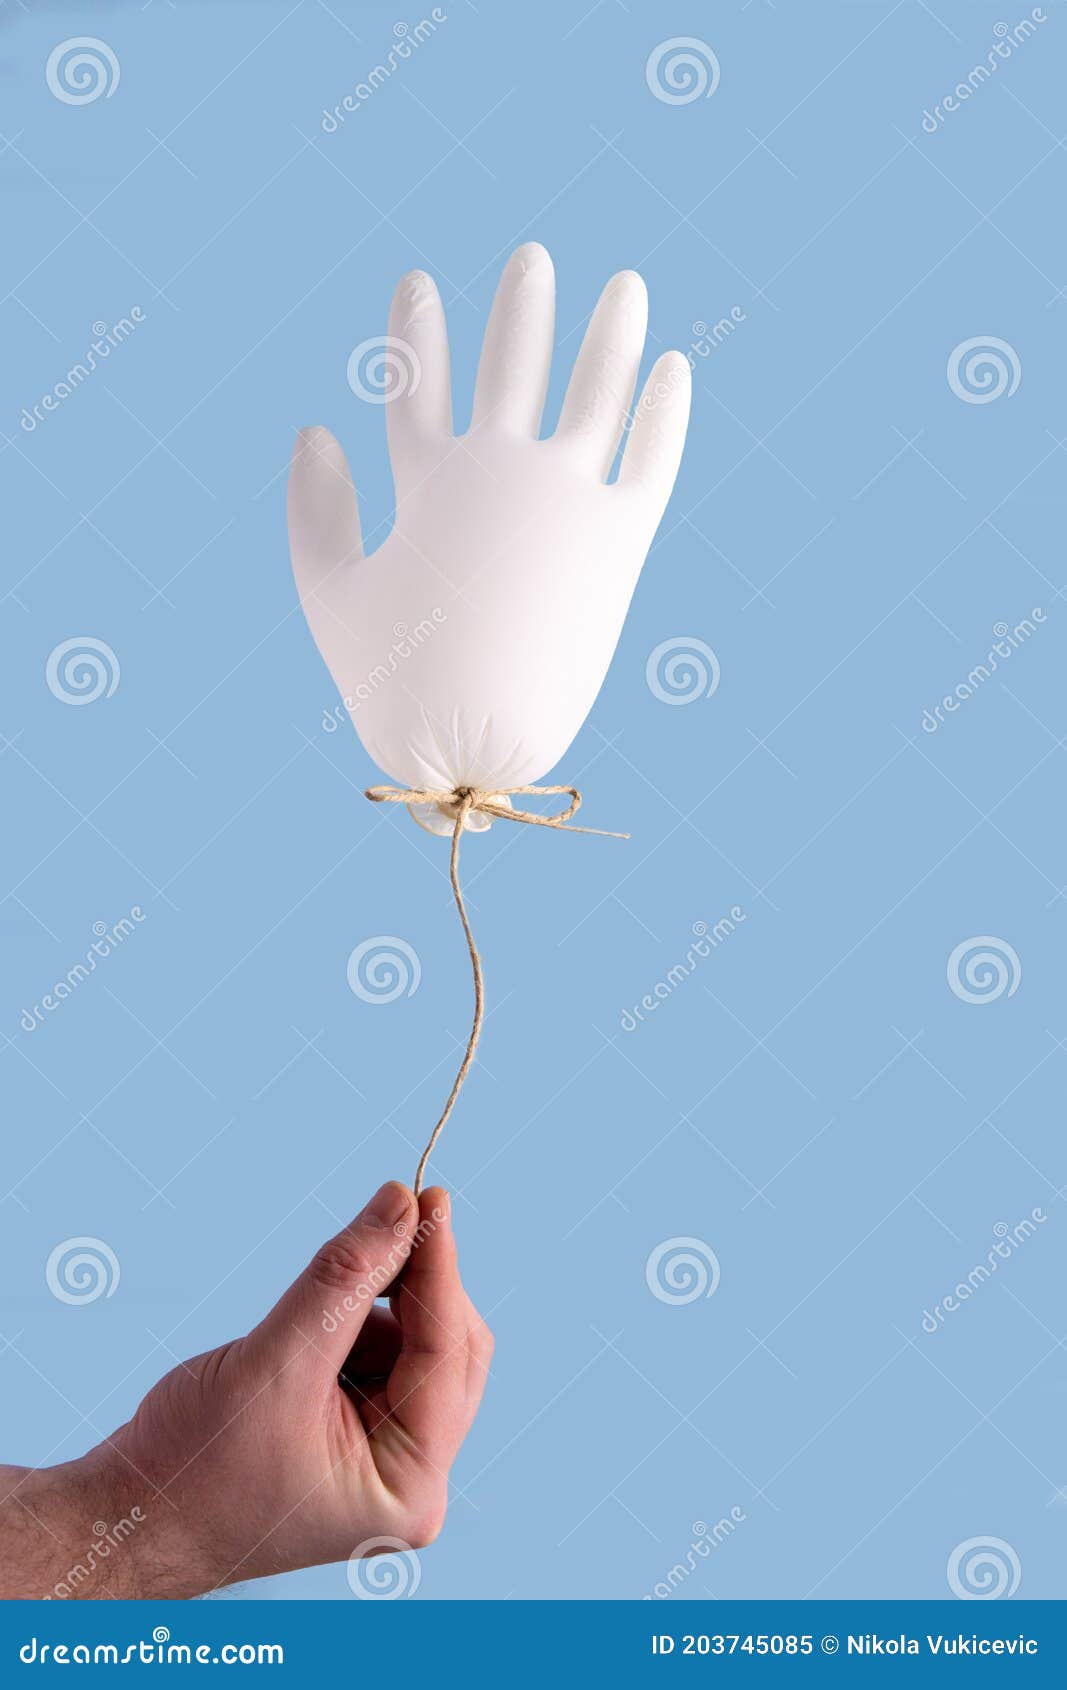 Hand Holding Glove Balloon Stock Image Image Of Care